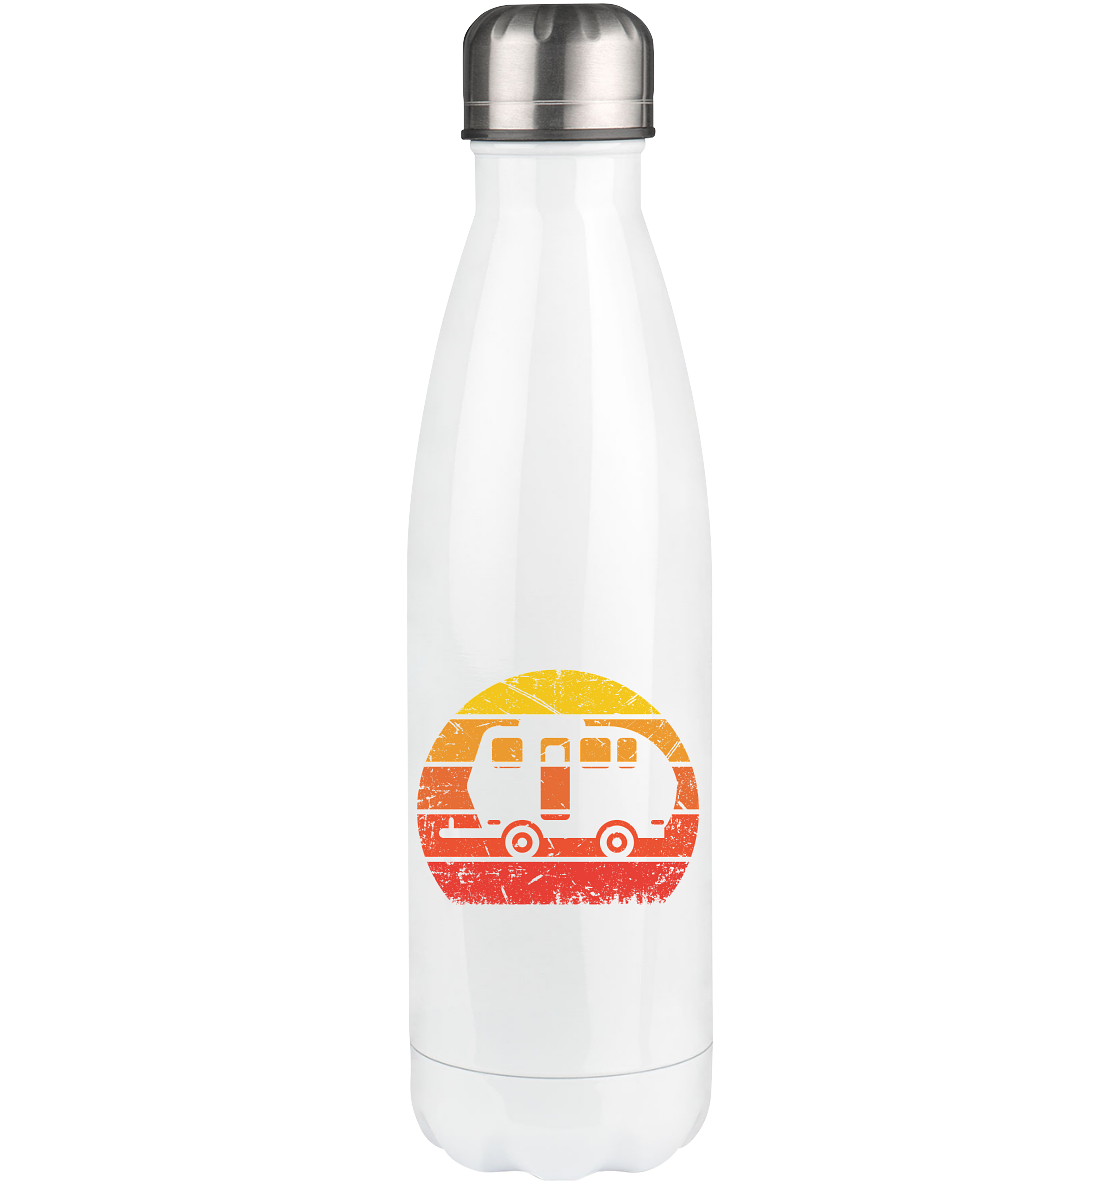 Vintage Sun and Camping 2 - Edelstahl Thermosflasche camping UONP 500ml